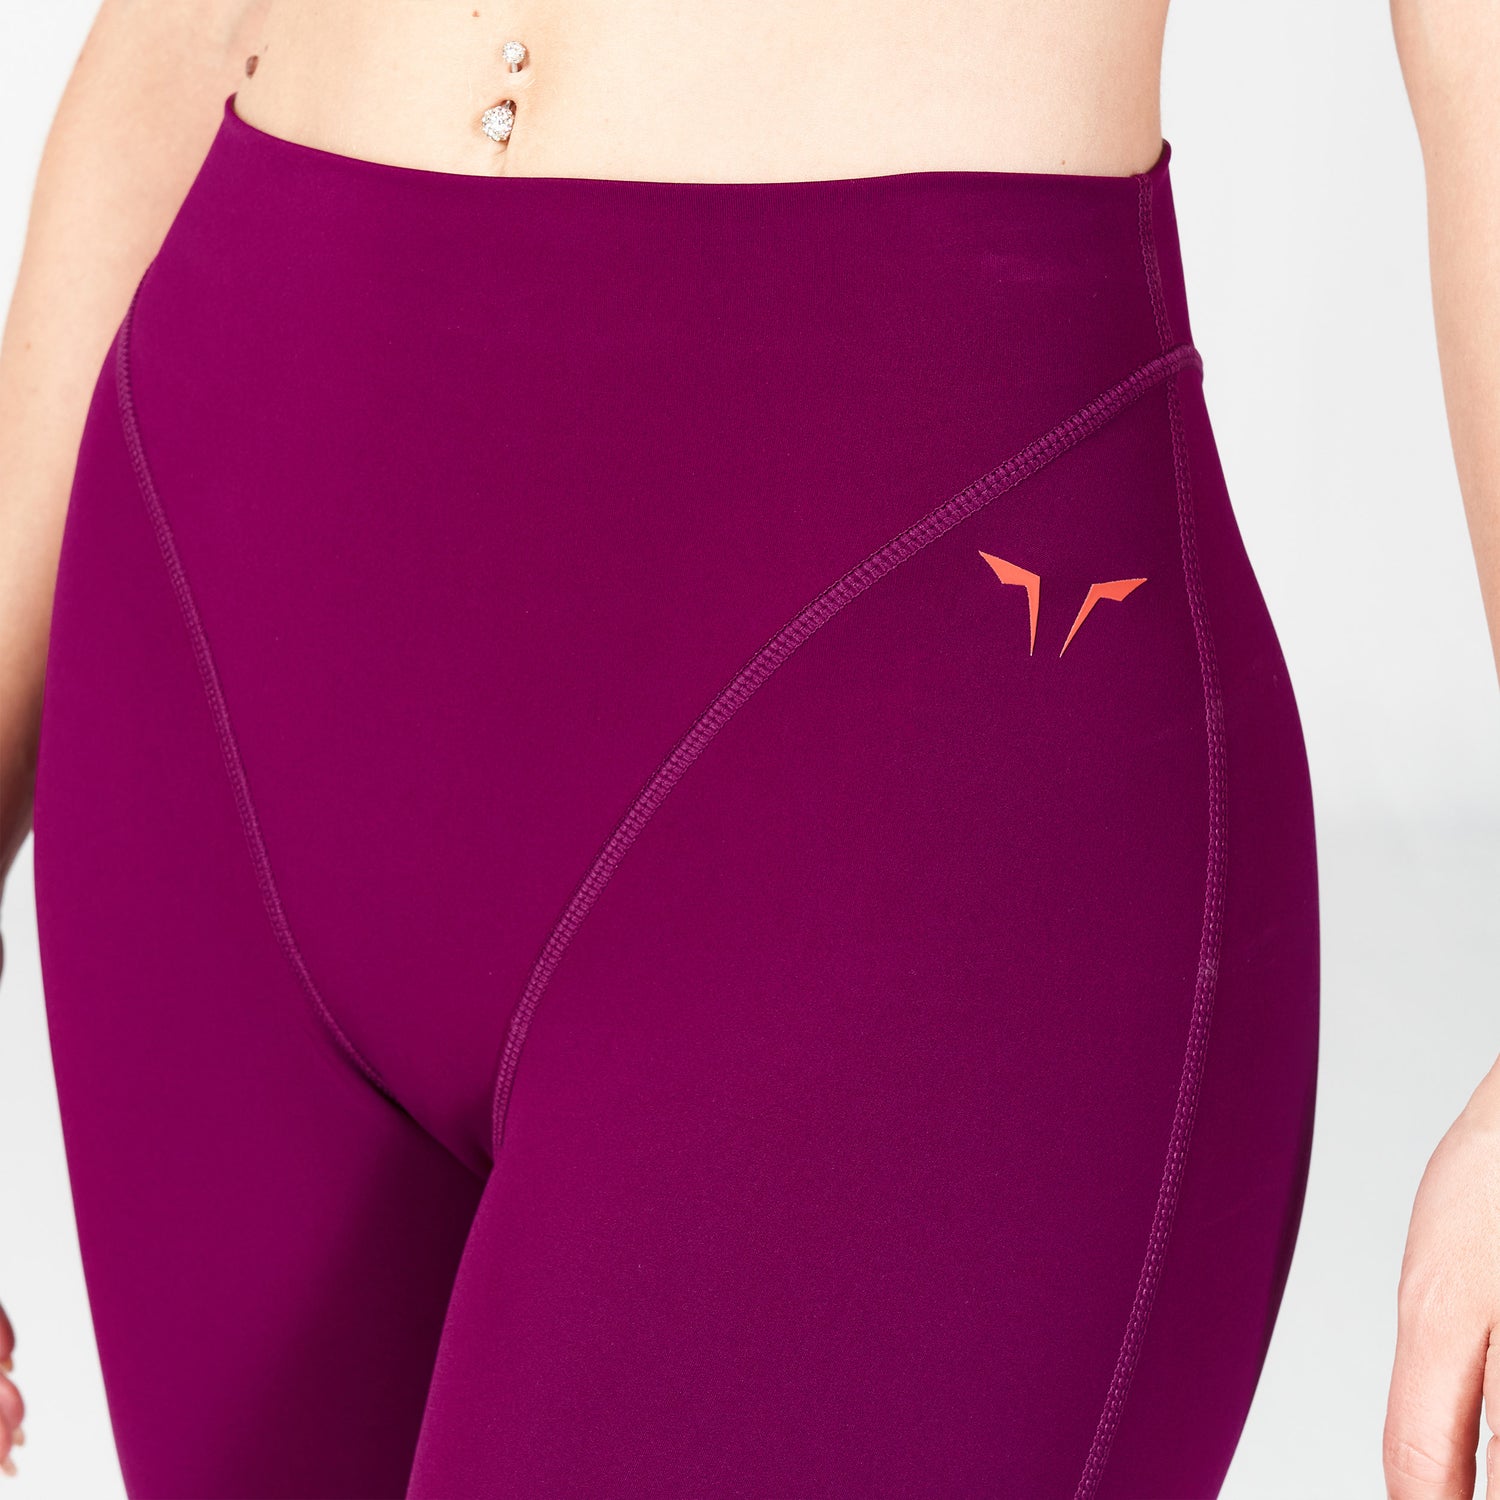 squatwolf-workout-clothes-core-v-cropped-leggings-dark-purple-gym-leggings-for-women